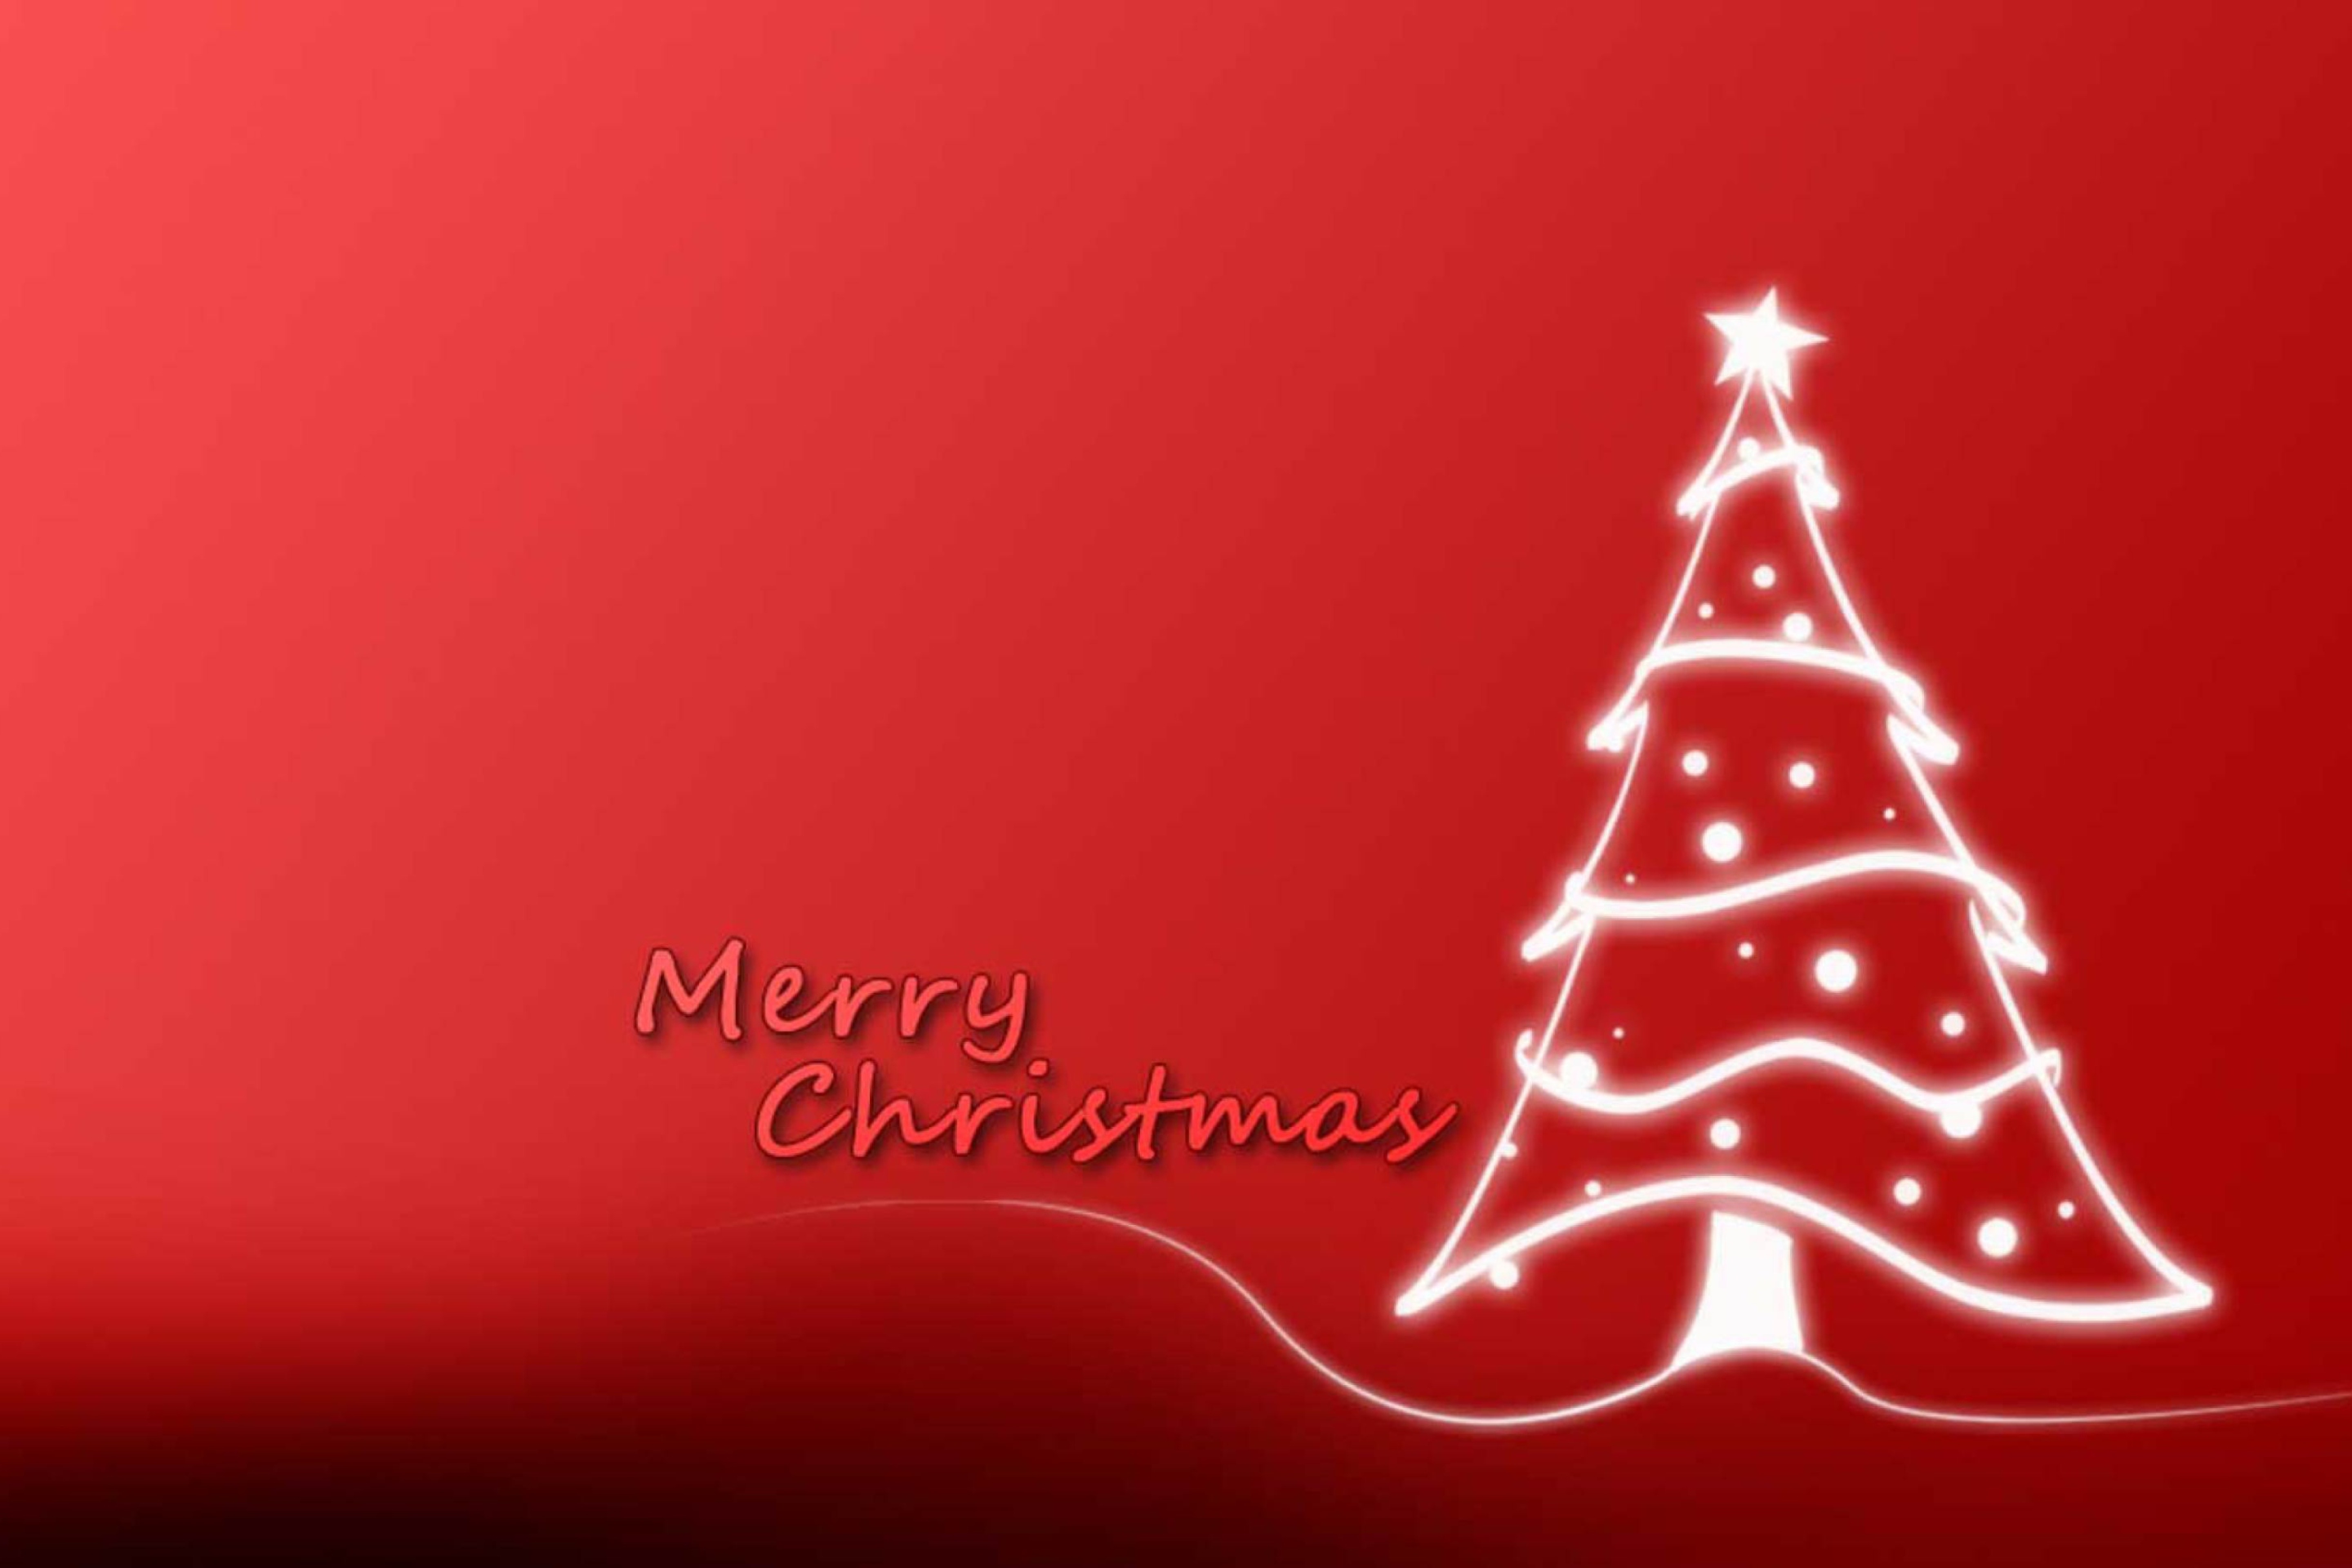 Christmas Red And White Tree wallpaper 2880x1920